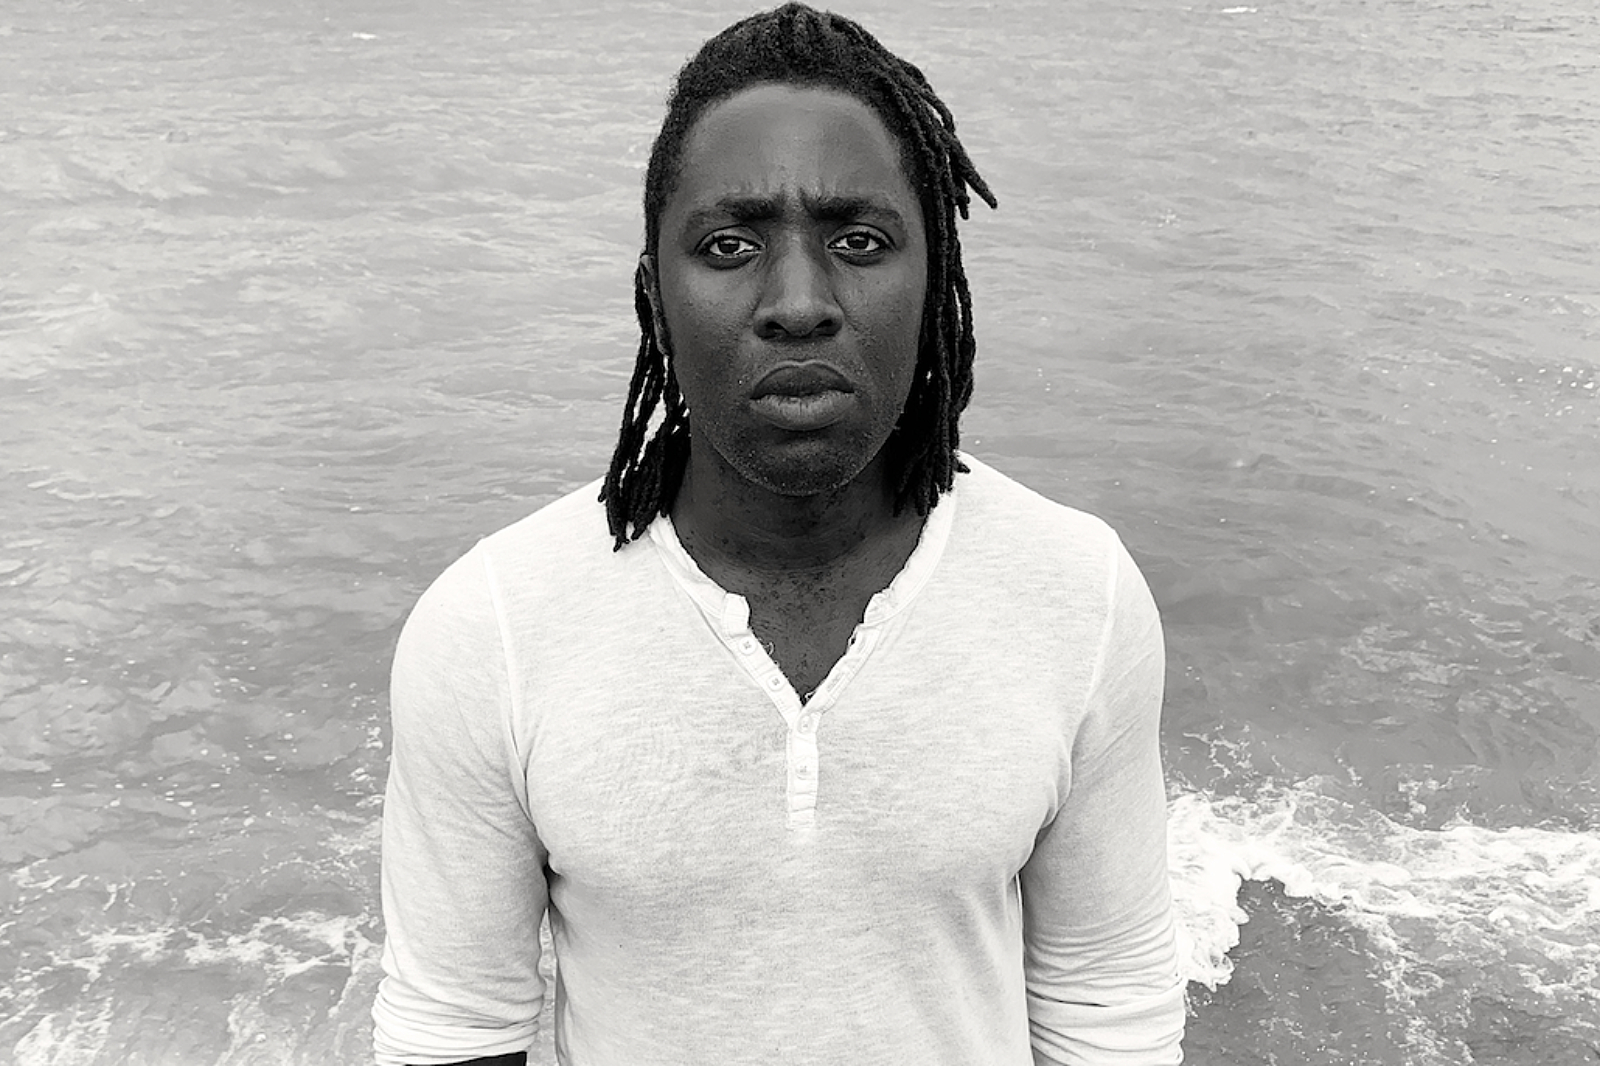 Kele shares new song 'From A Place Of Love'